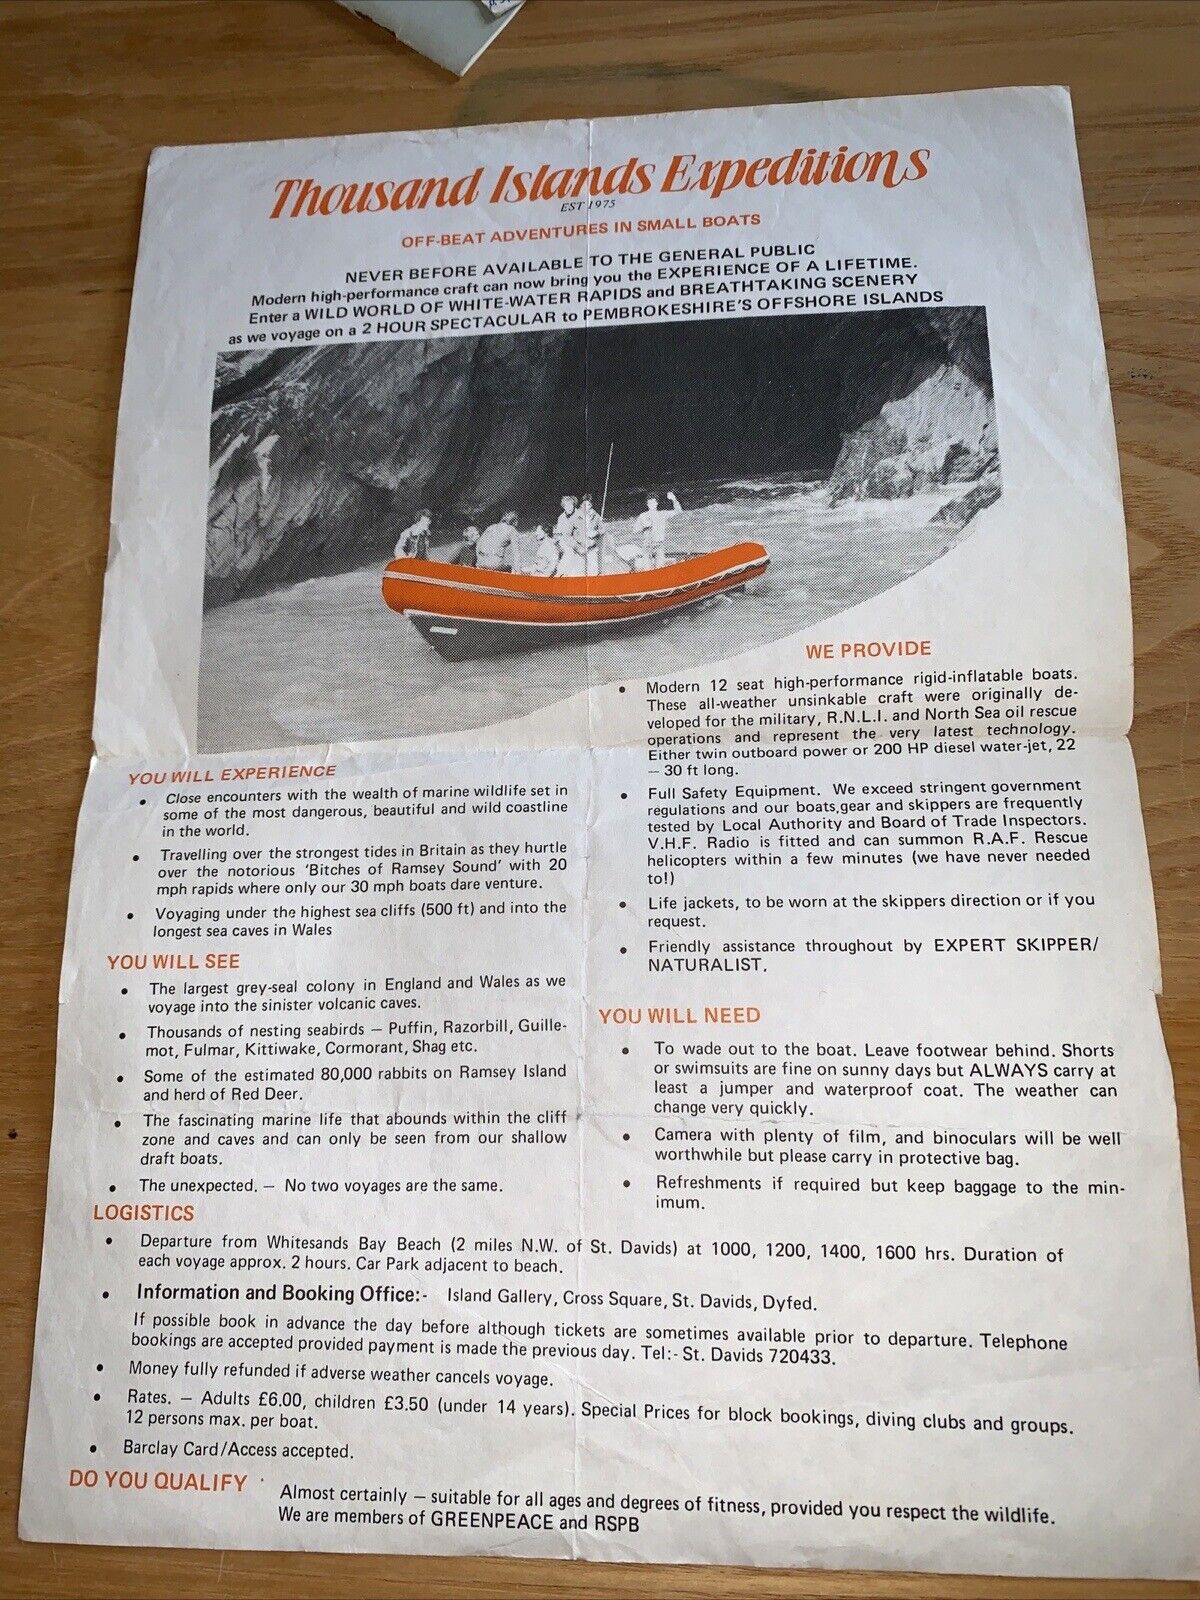 Greenpeace Member 1975 Thousand Thousand Islands Expedition Rapid Water Sm Boat